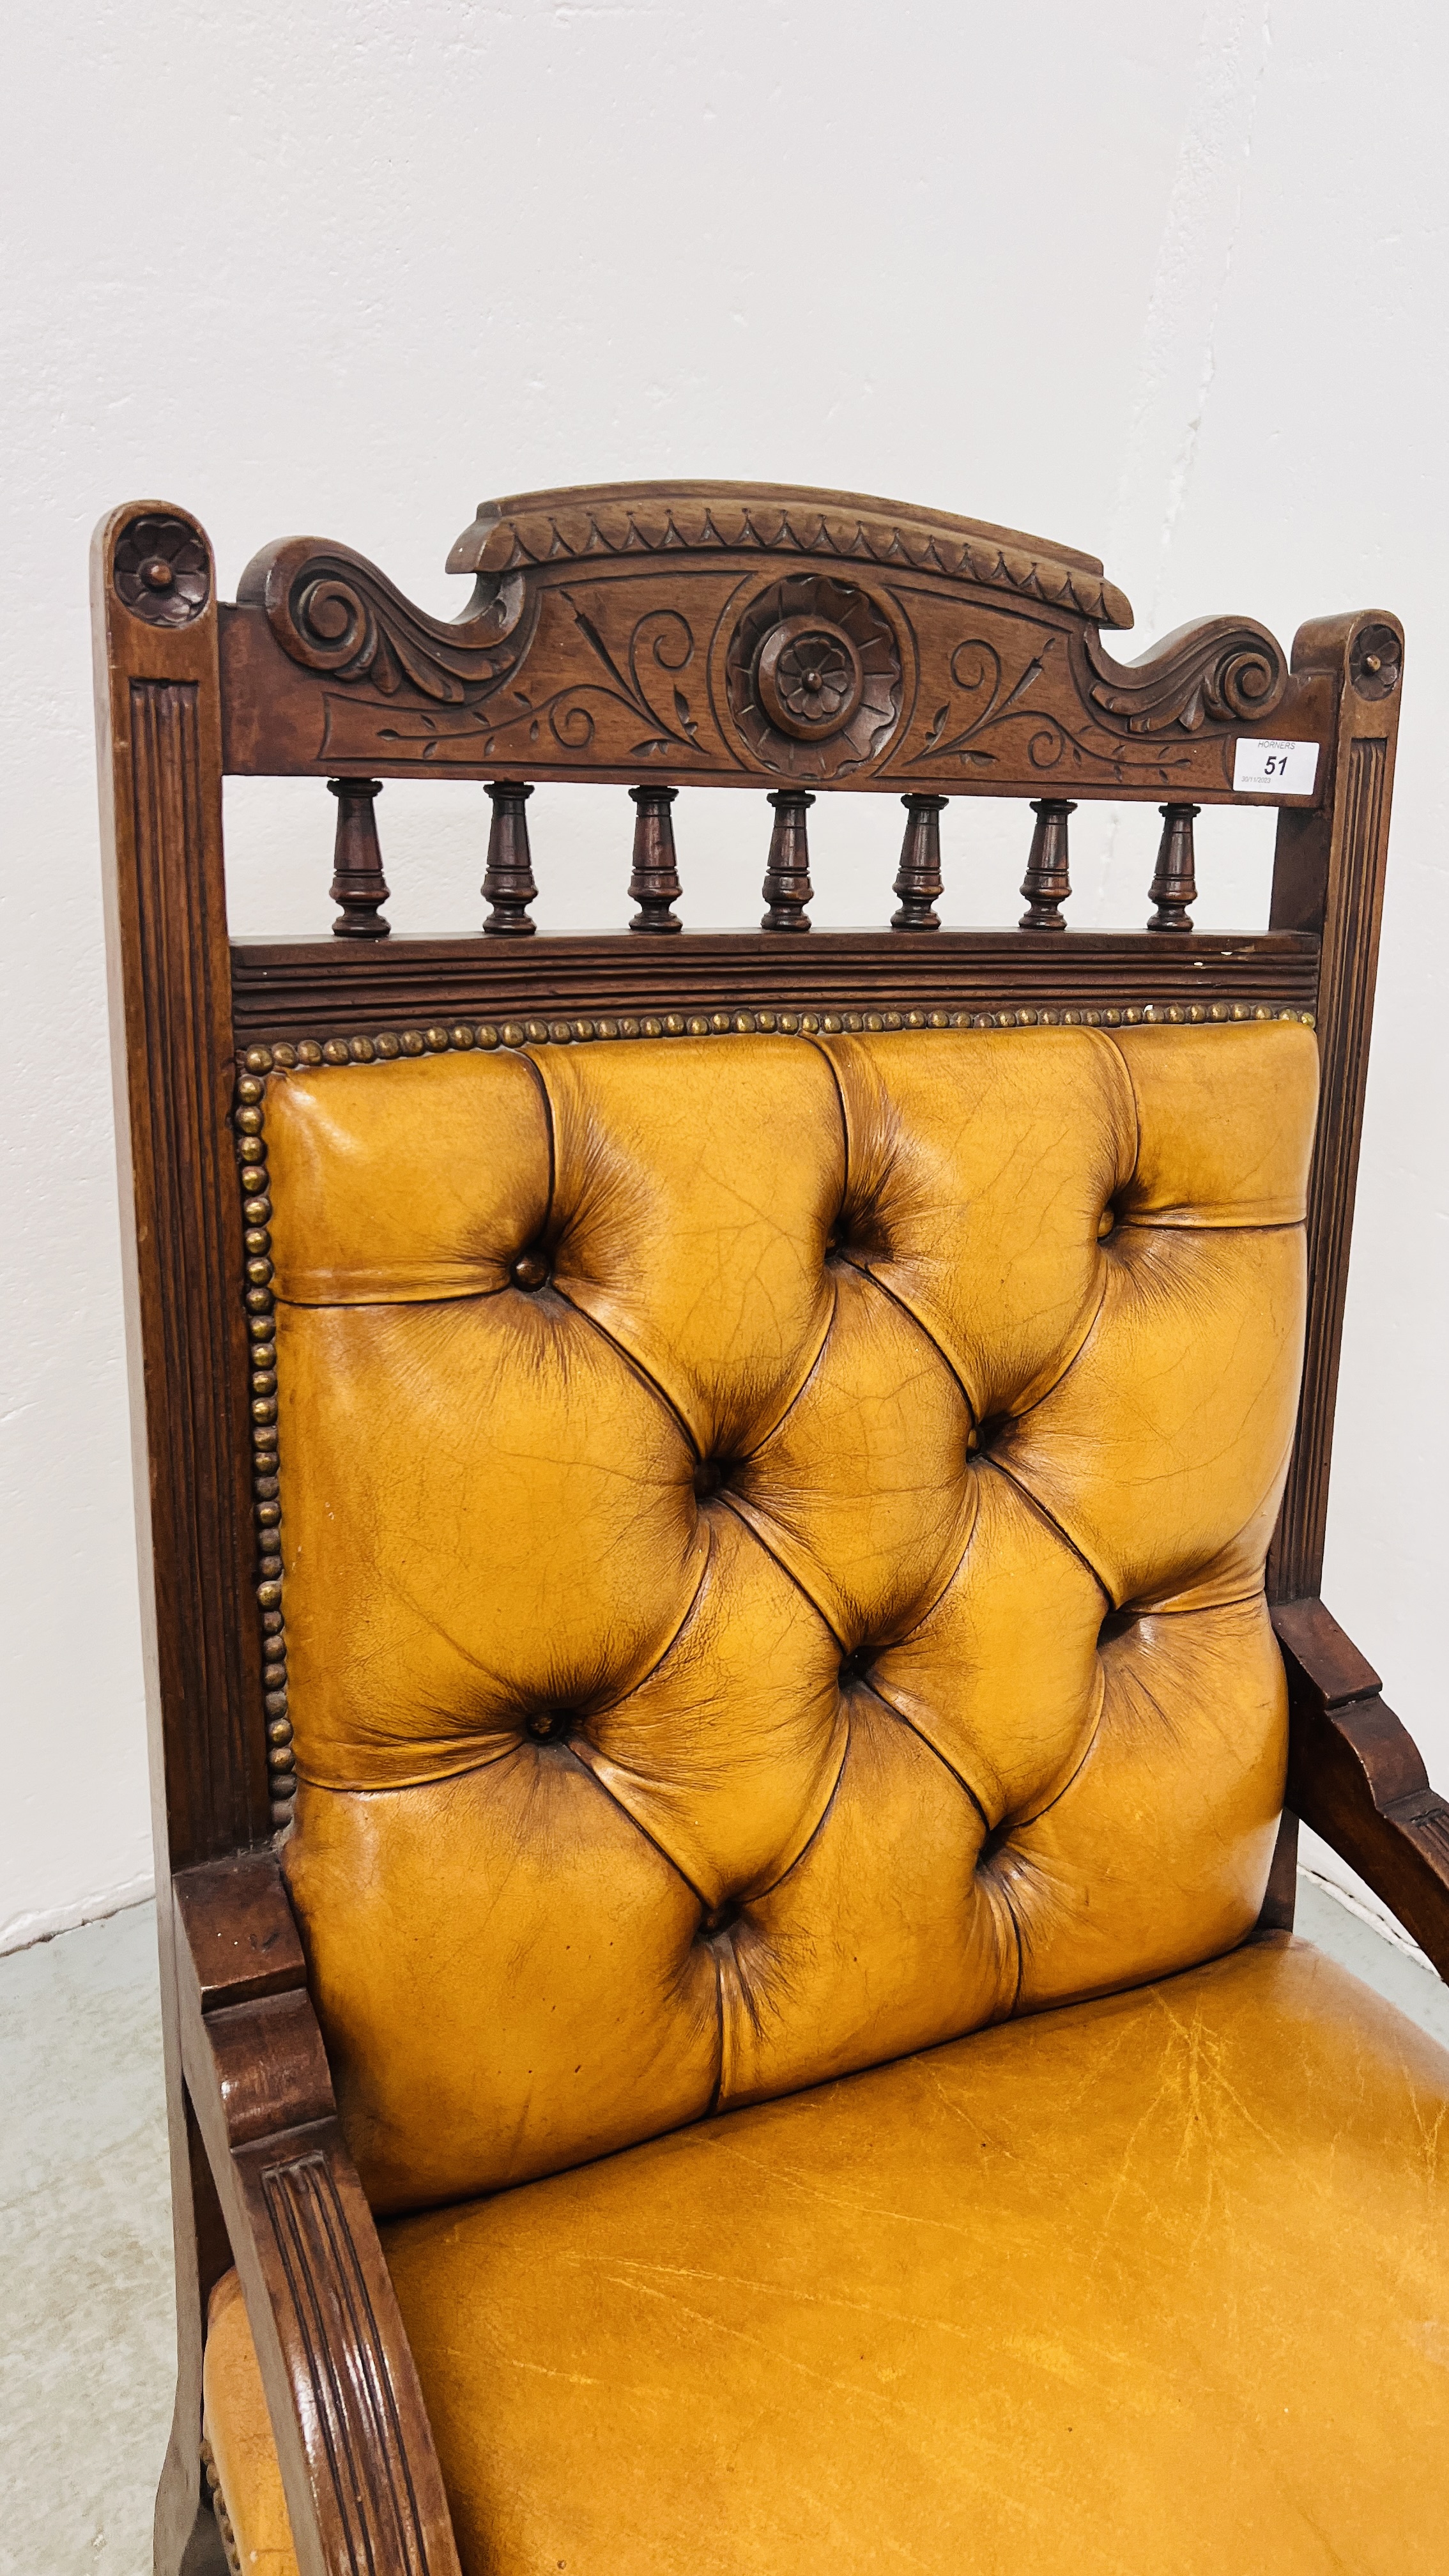 ANTIQUE EDWARDIAN MAHOGANY LOW CHAIR UPHOLSTERED IN TAN LEATHER - BUTTON BACK. - Image 2 of 12